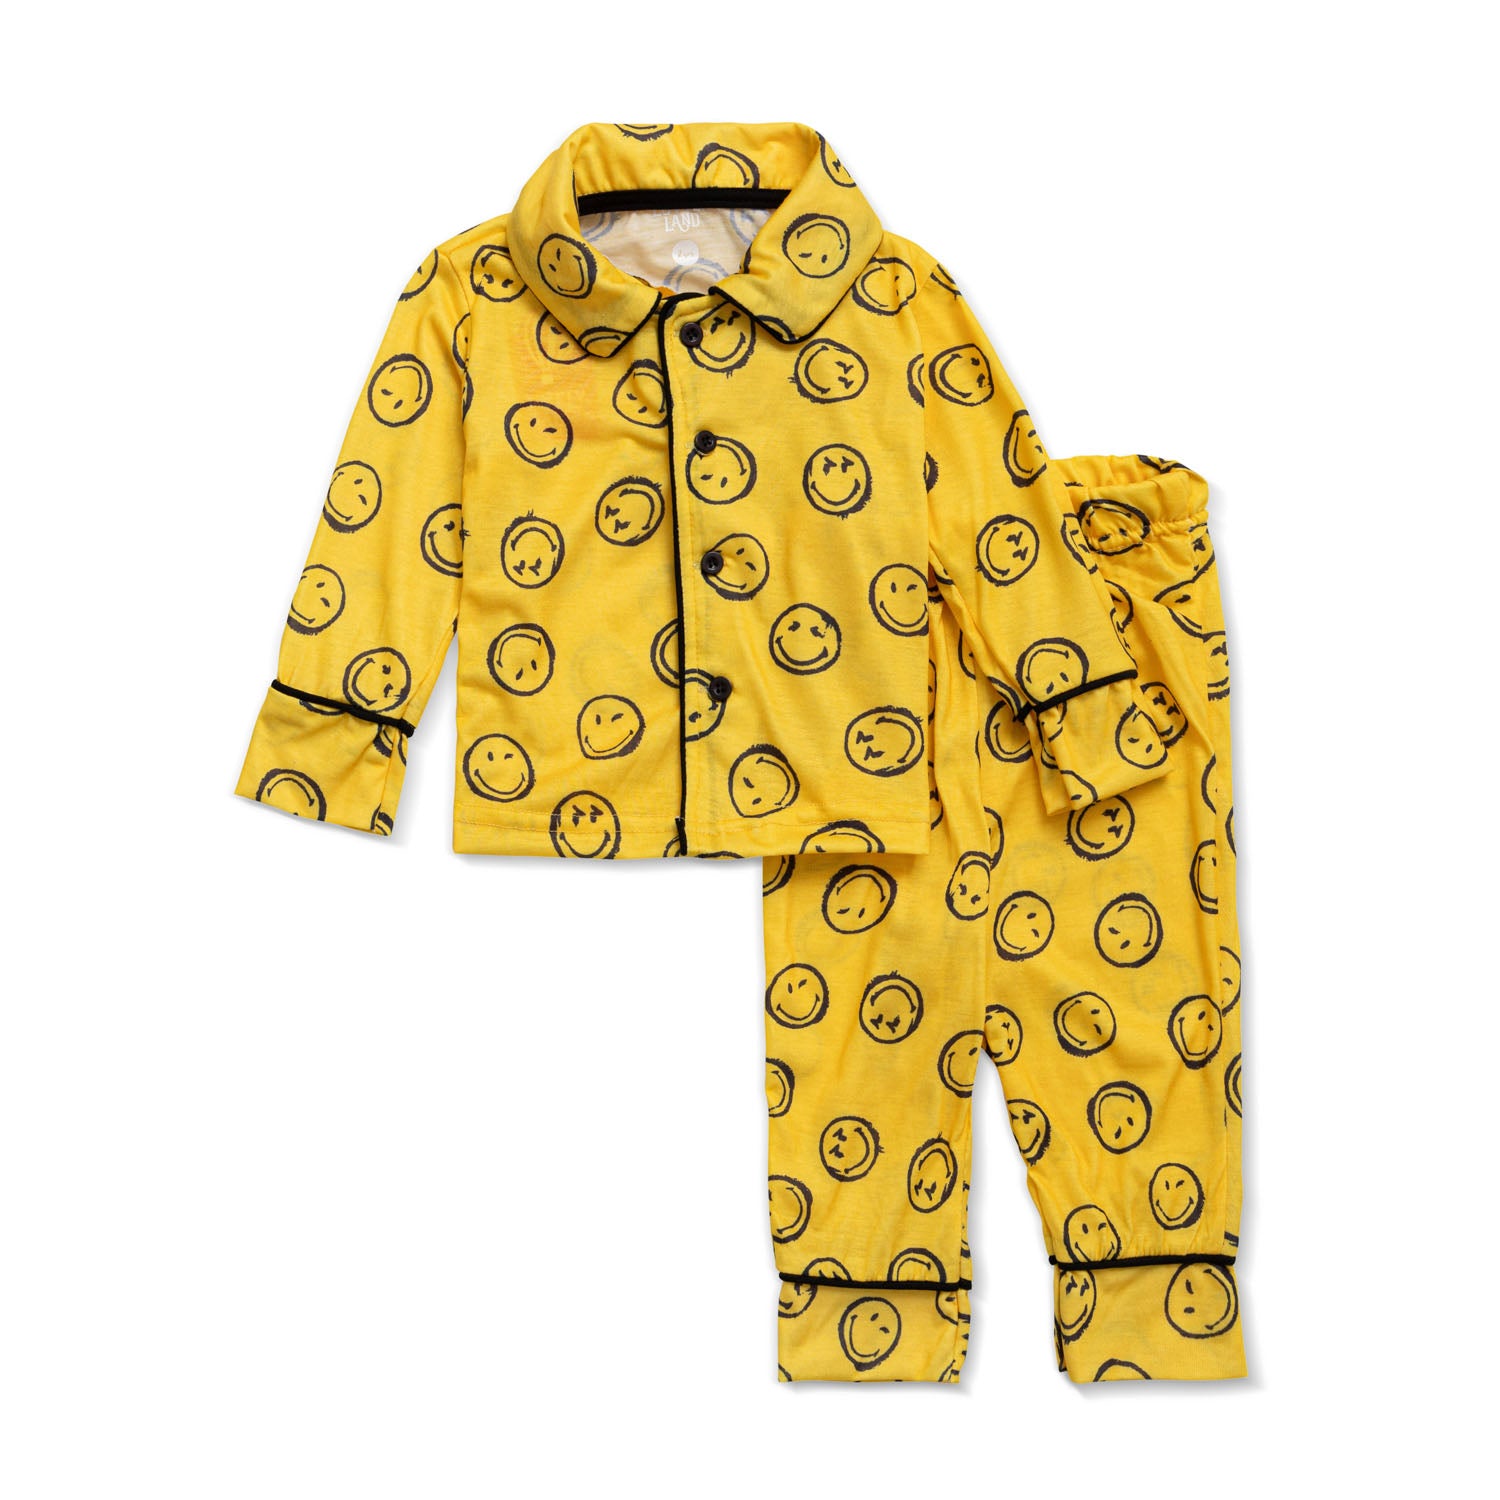 yellow buttoned up shirt with blue emoji print and yellow pants with blue emoji print pyjama